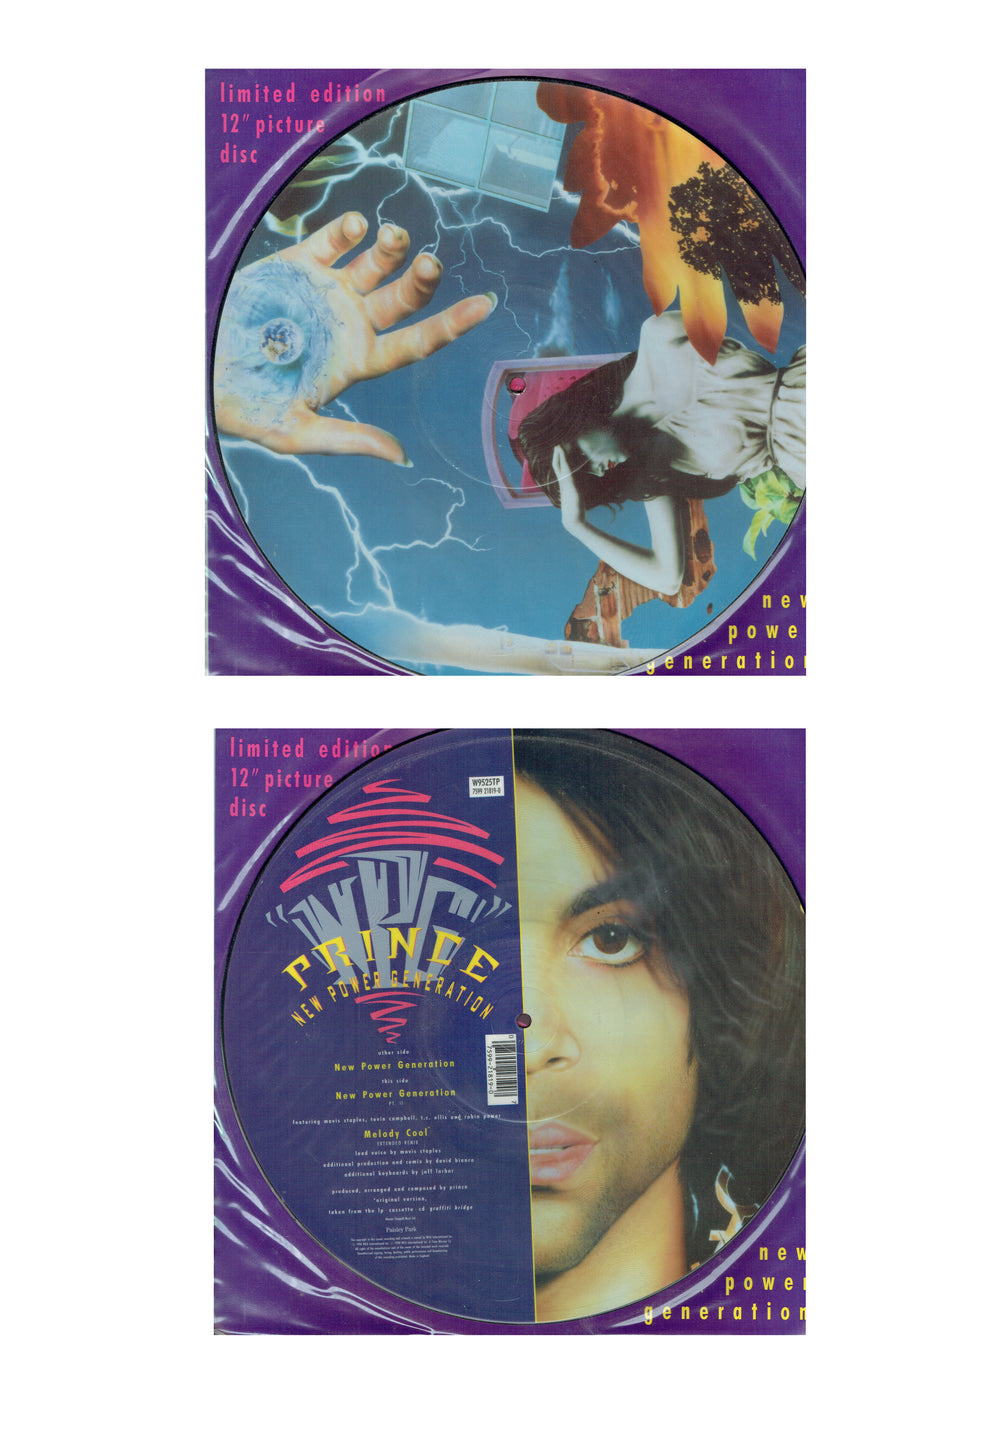 Prince – New Power Generation Vinyl 12" Single Picture Disc Preloved UK 1990